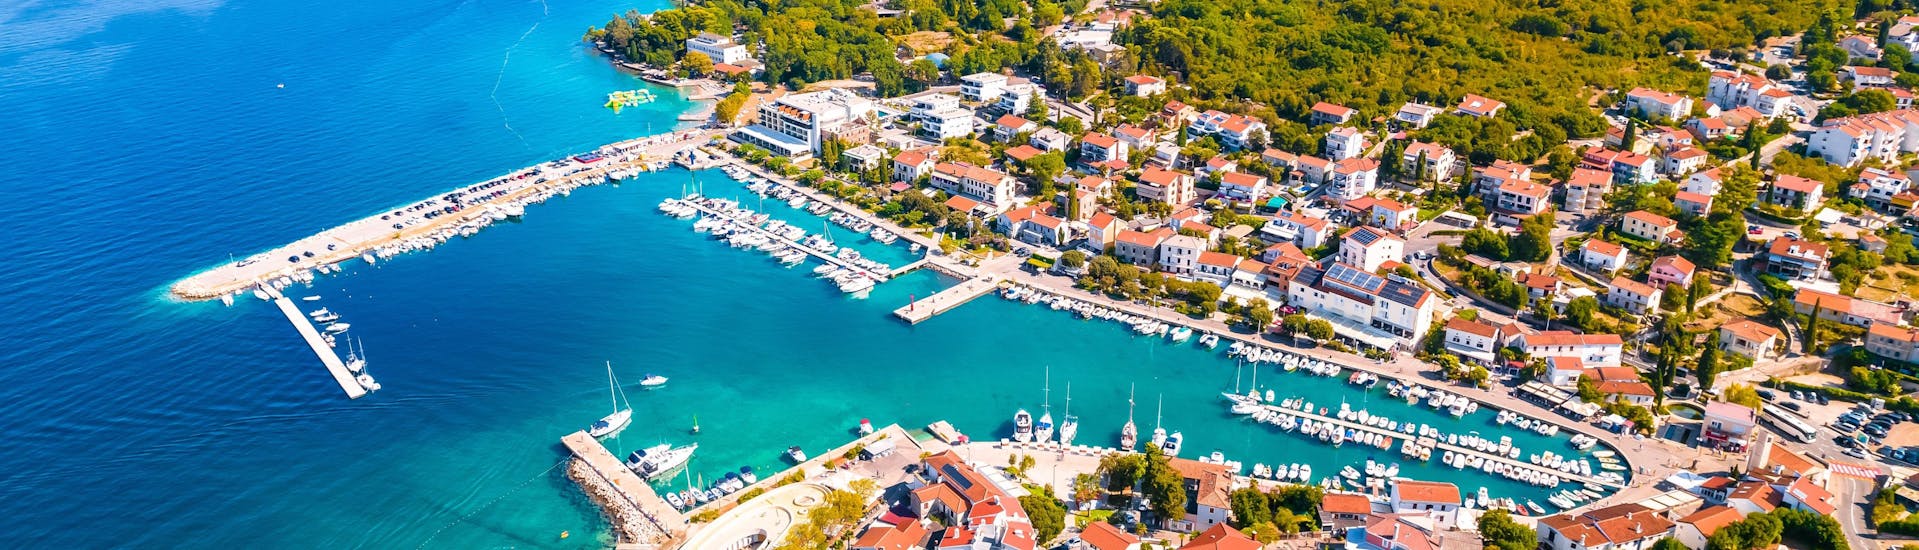 View from the air of the port of Malinska in Croatia.